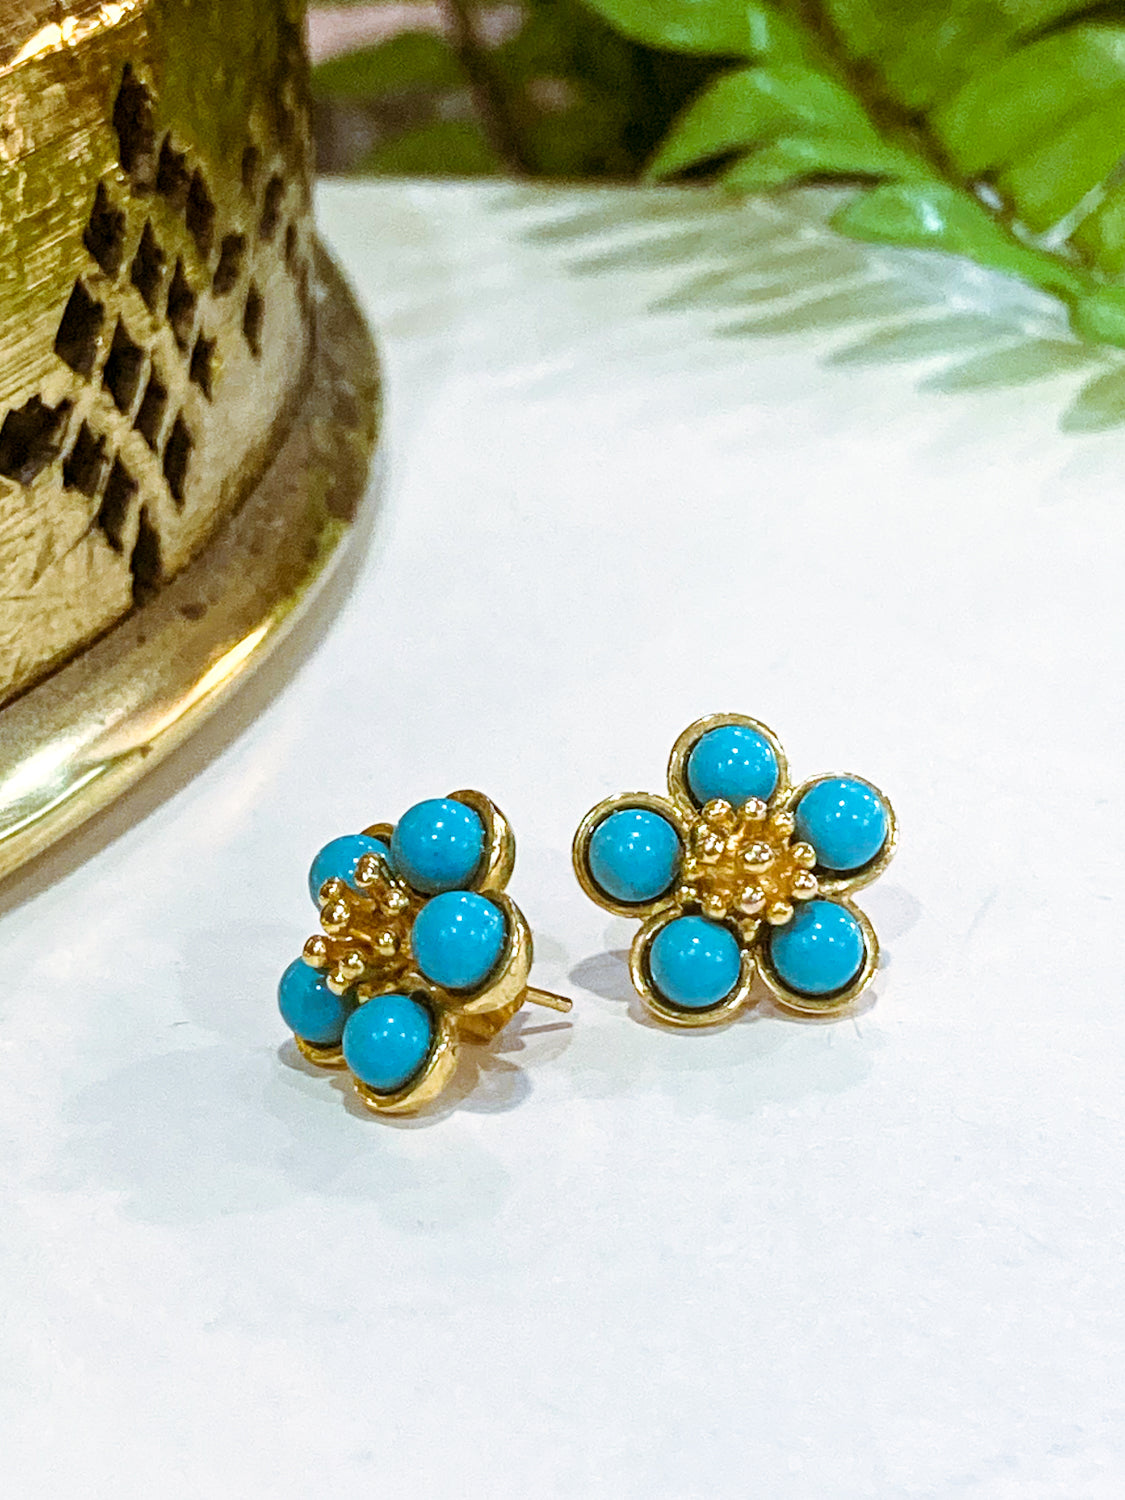 Gorgeous 14K Yellow Gold Turquoise Bead Flower Post Earrings